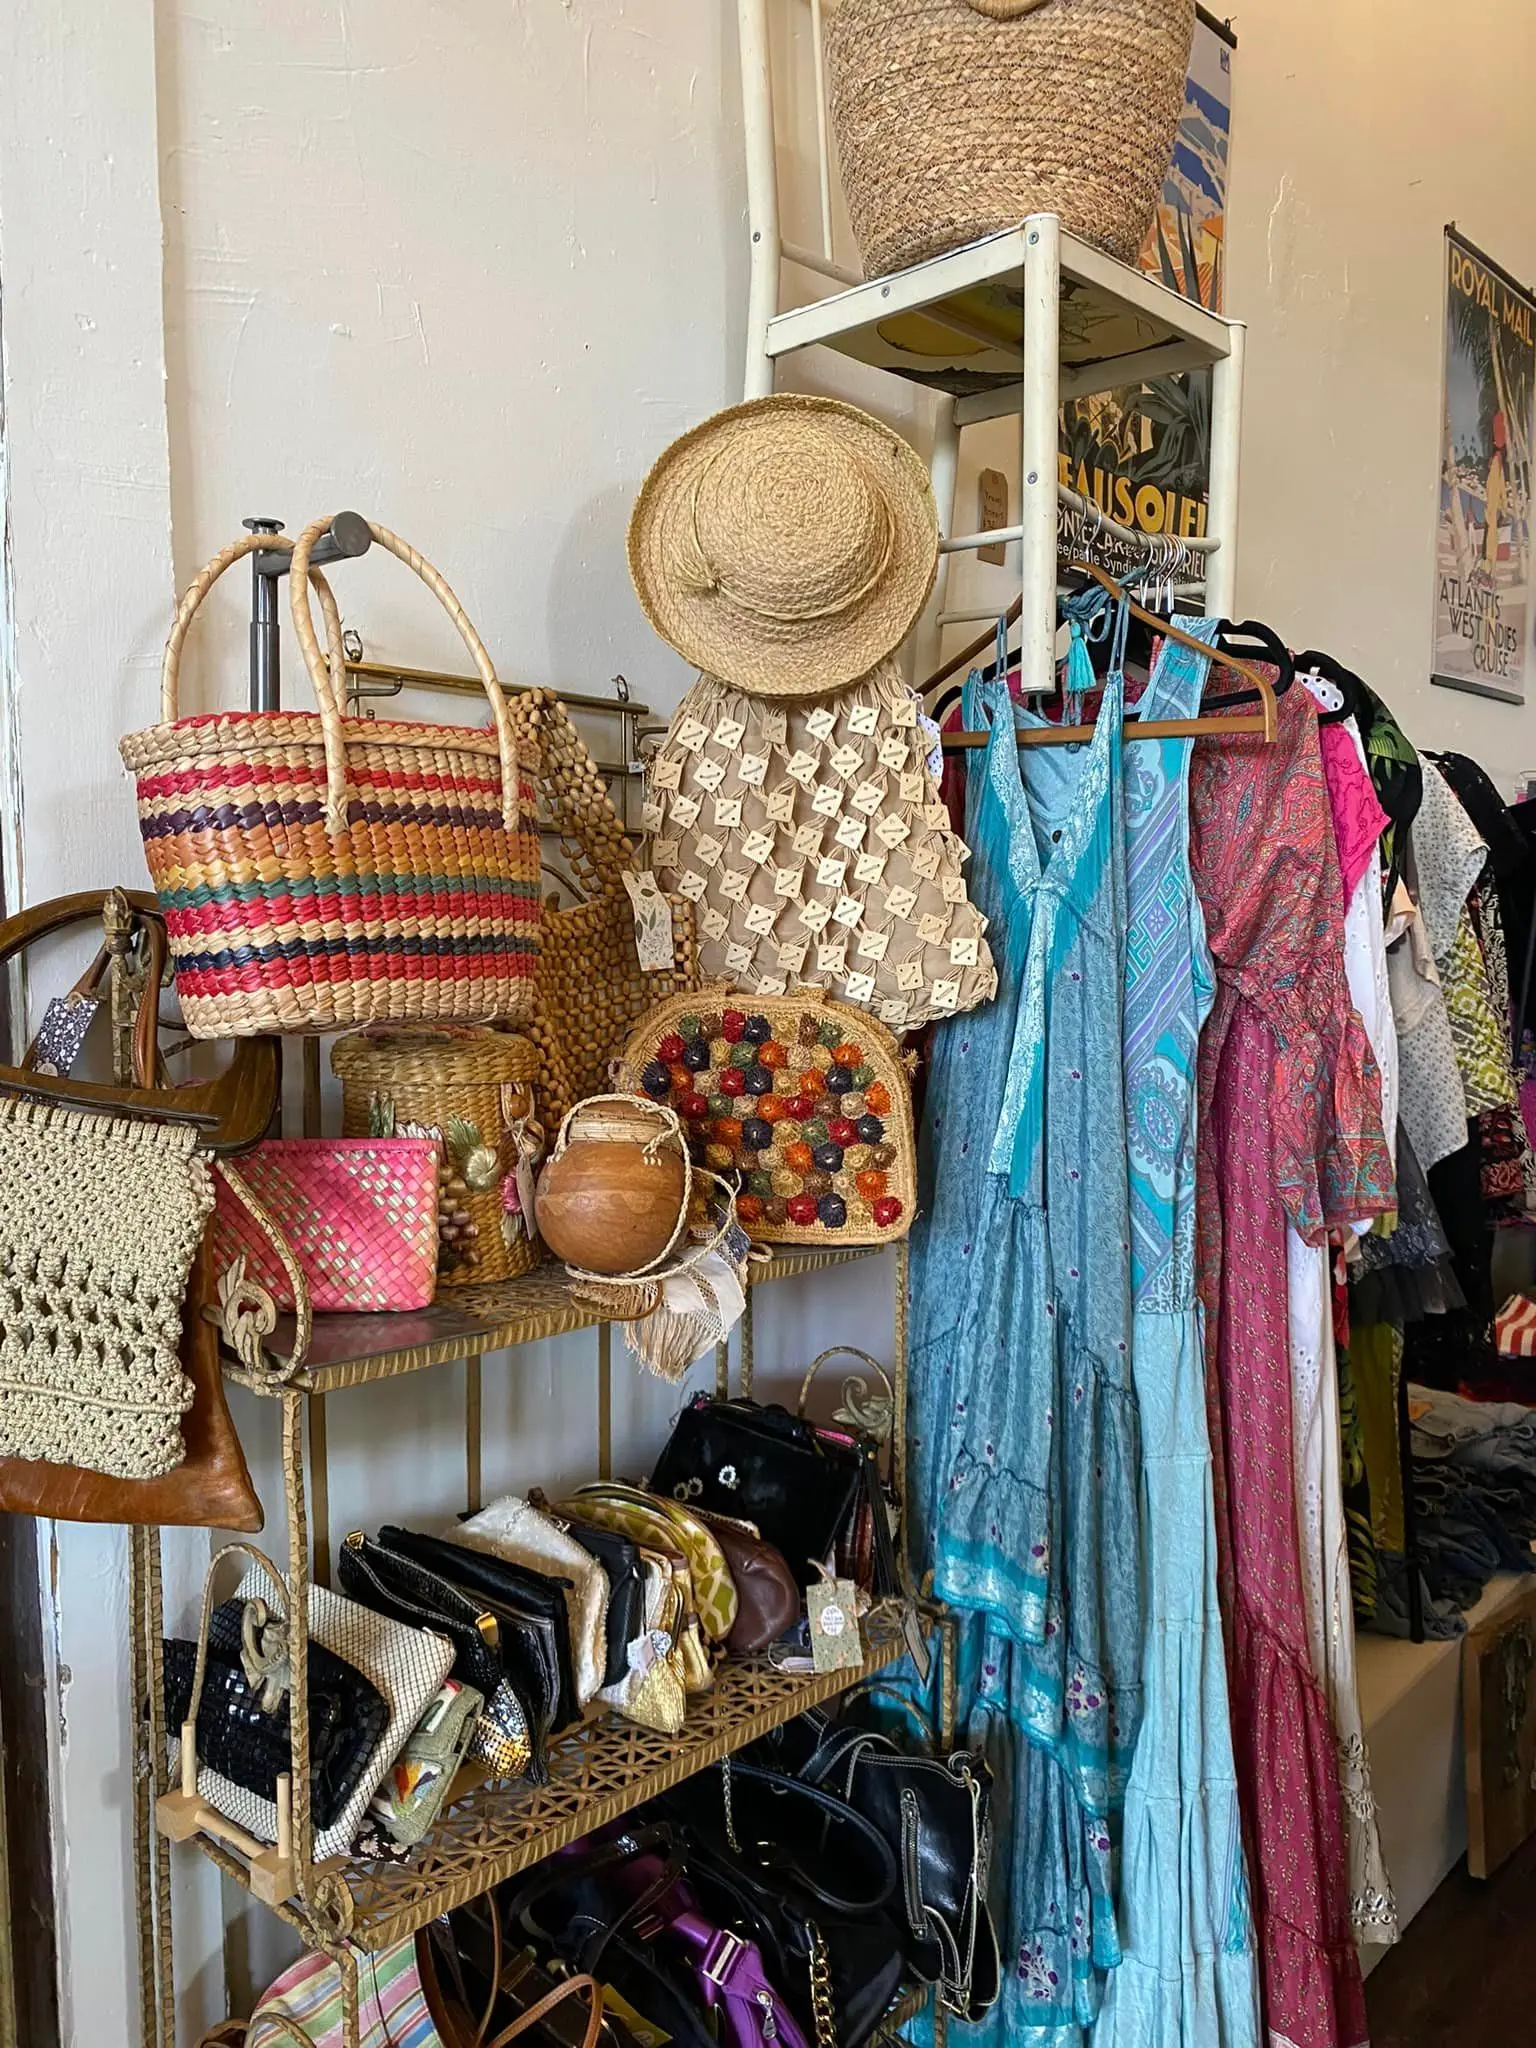 Vintage clothing and items in Bradenton Florida